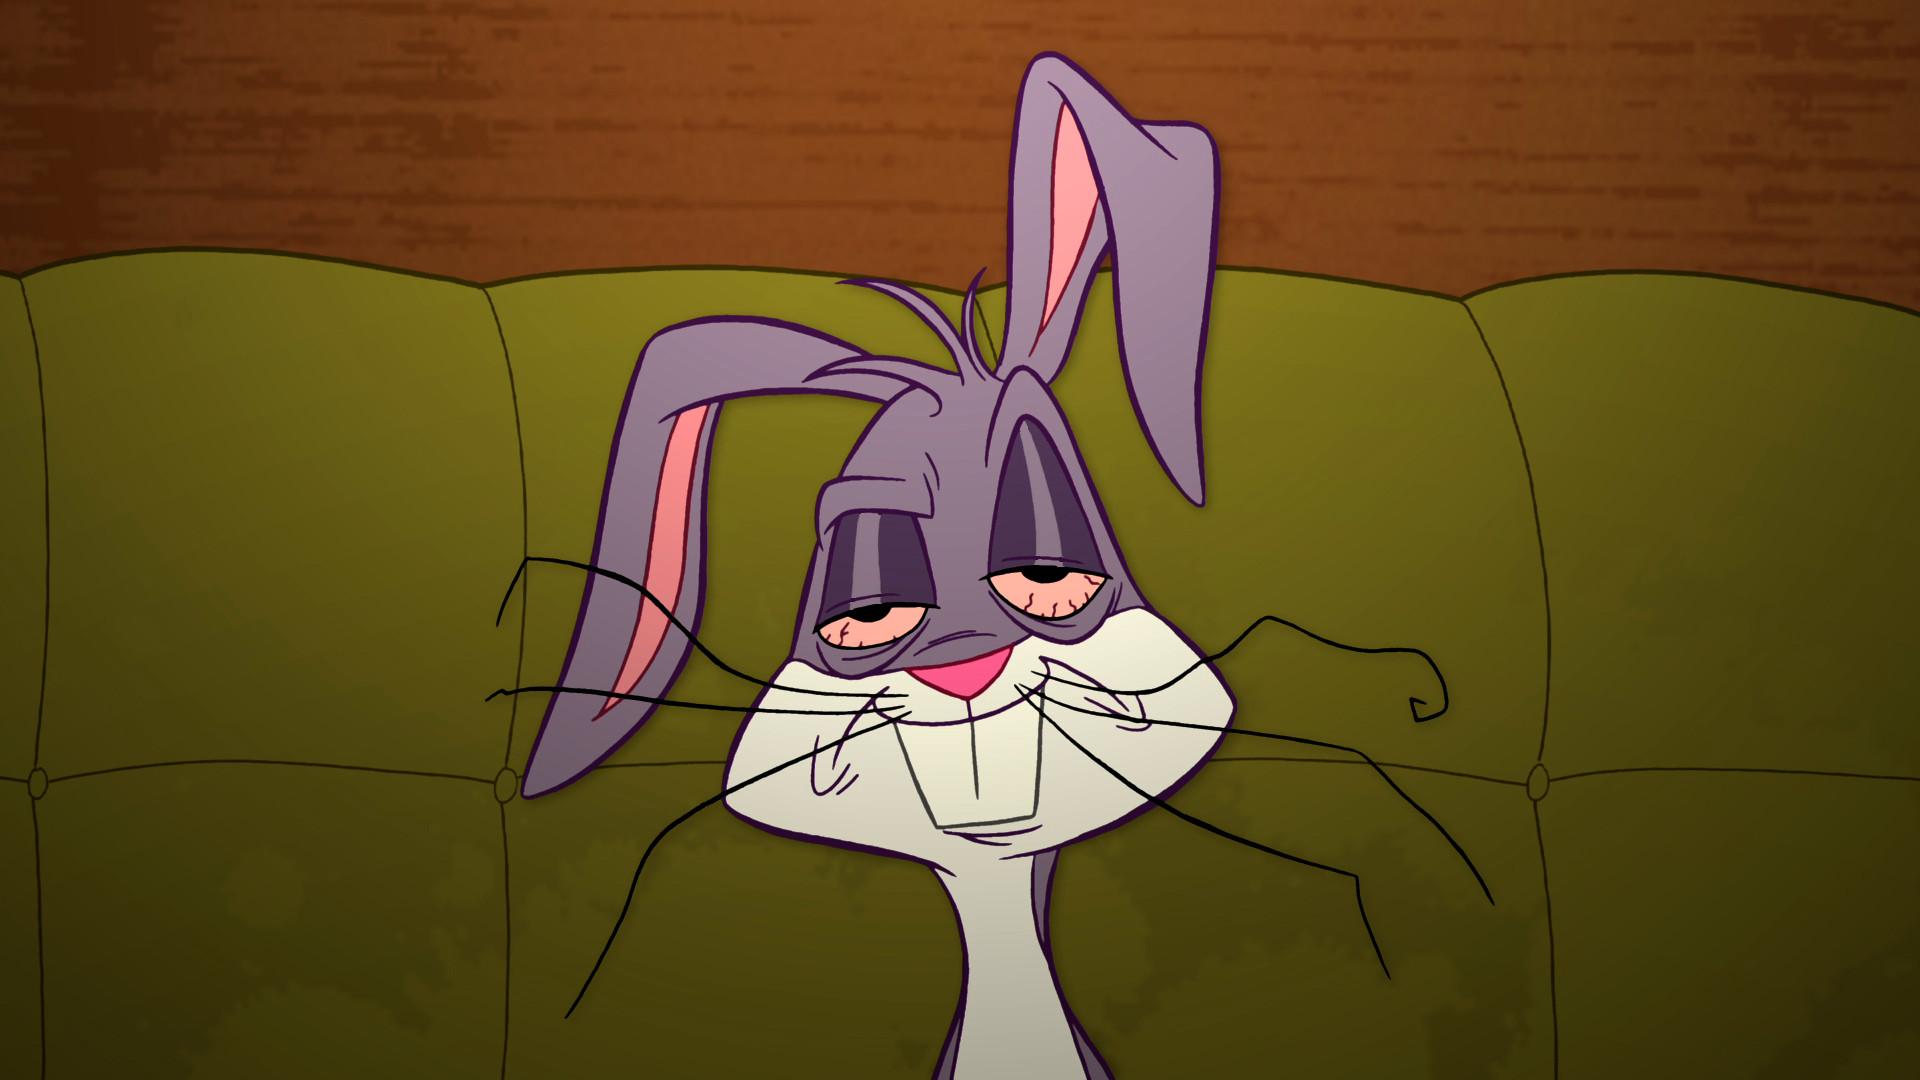 Bugs Bunny sits on a couch with his eyes closed and a smile on his face - Bugs Bunny